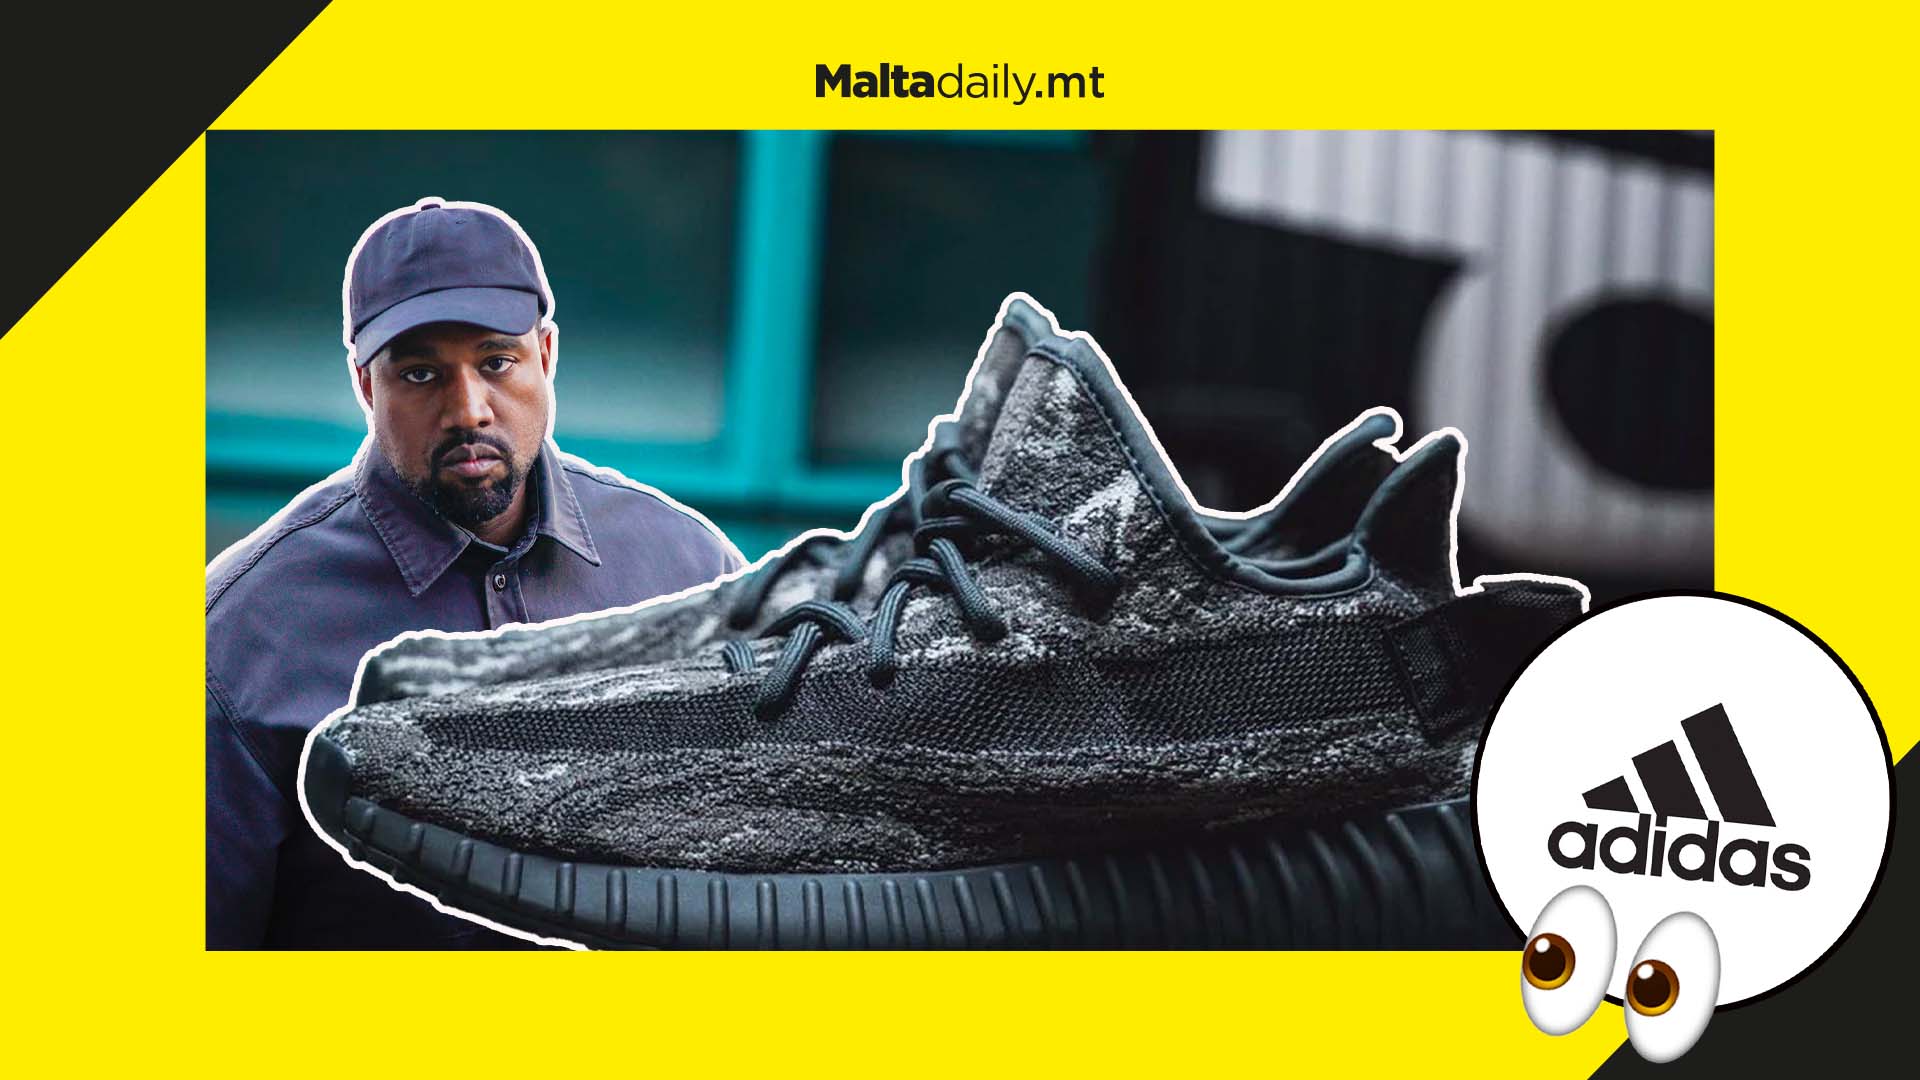 Adidas continue Yeezy sales under new name after dropping Ye